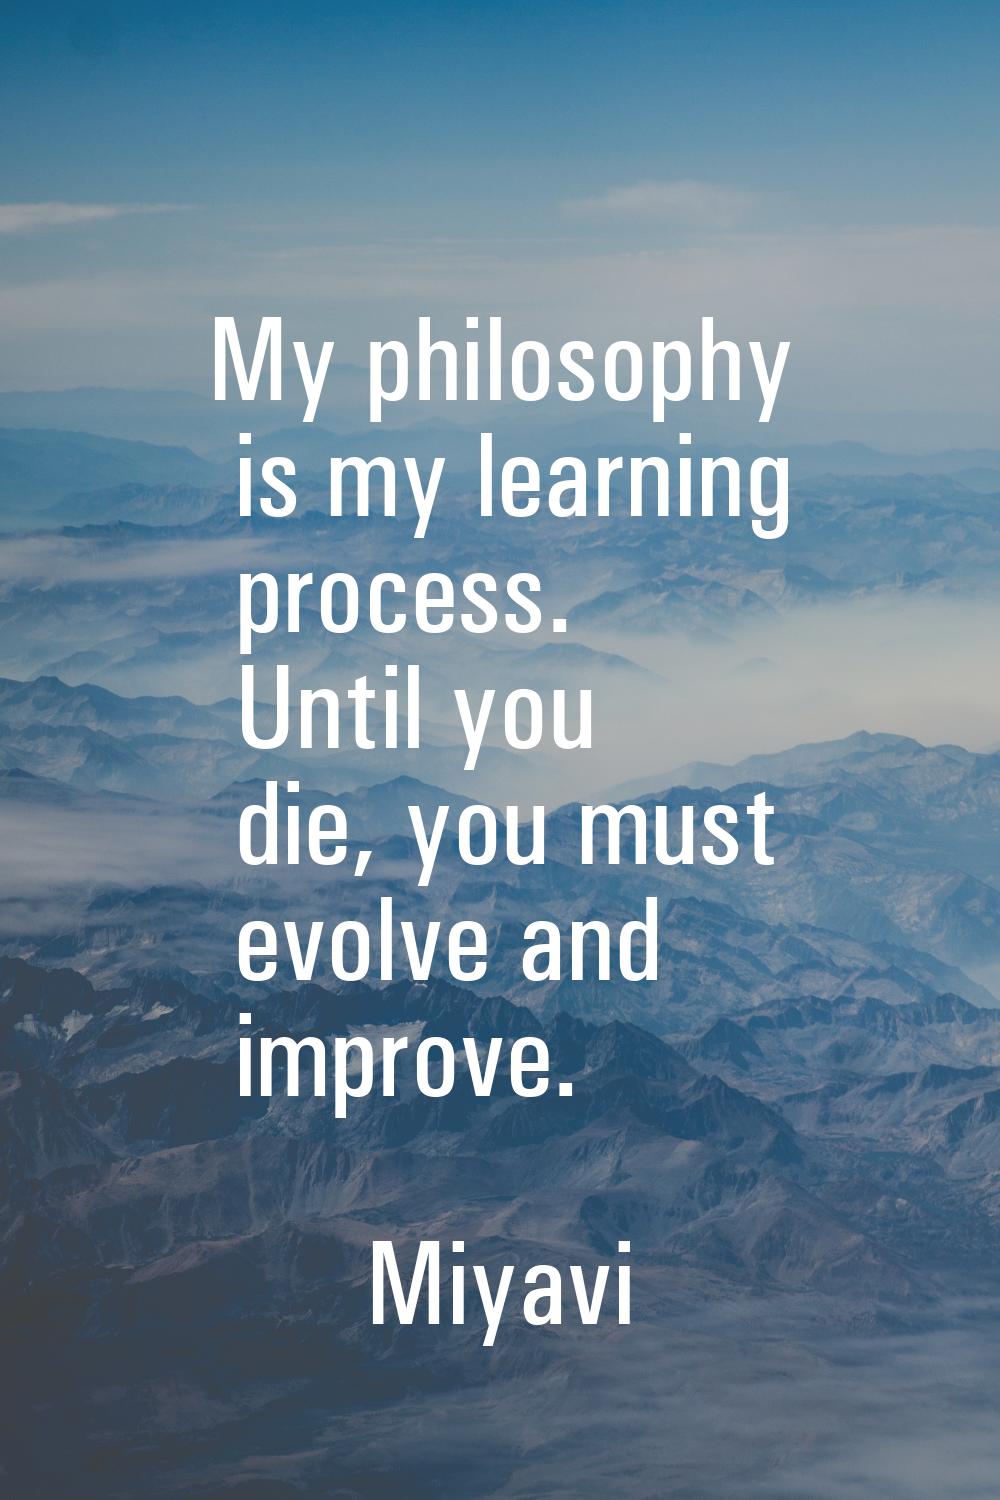 My philosophy is my learning process. Until you die, you must evolve and improve.